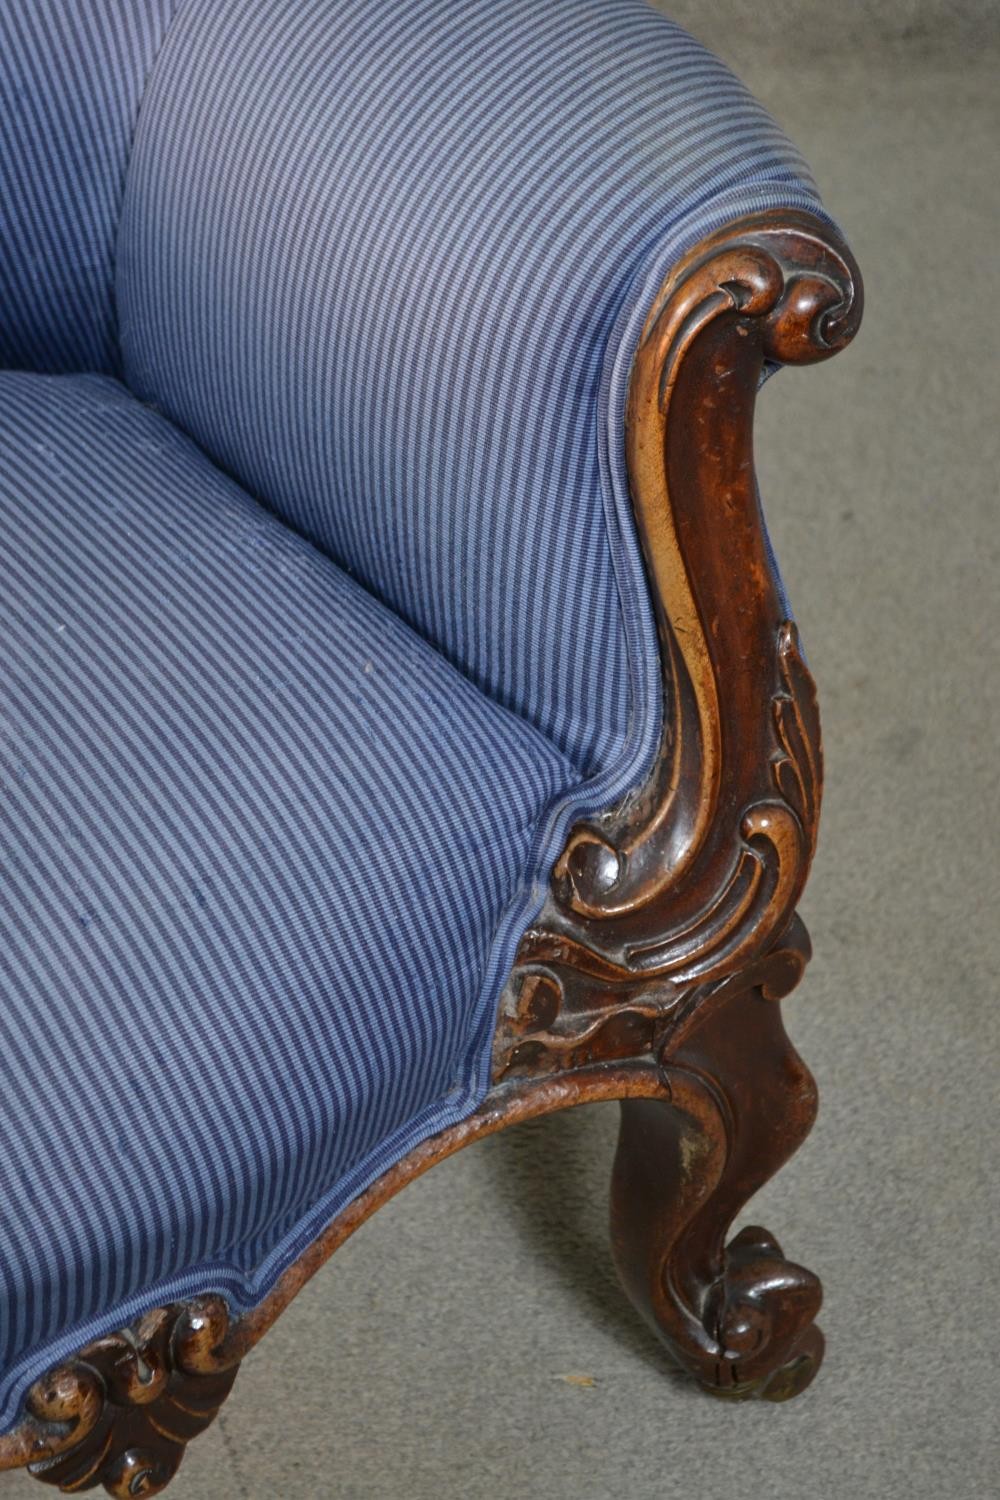 A circa 1830s mahogany tub armchair, upholstered in striped blue fabric, with a button back, the - Image 5 of 7